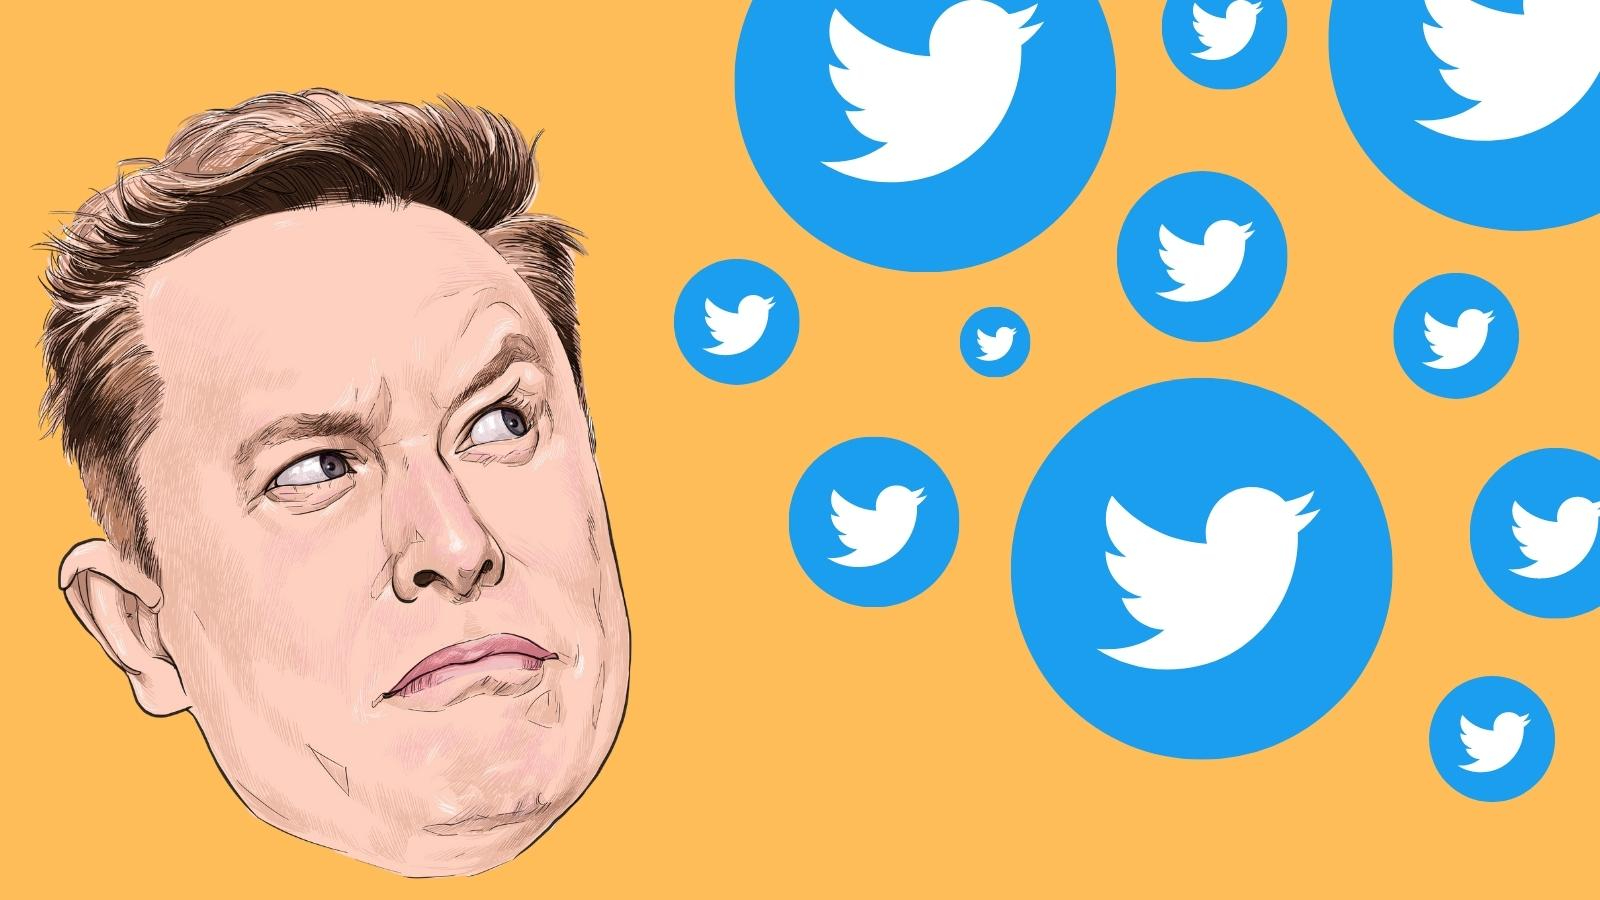 Illustration of Elon Musk drawn by Thonghud, puzzled by falling Twitter slogans